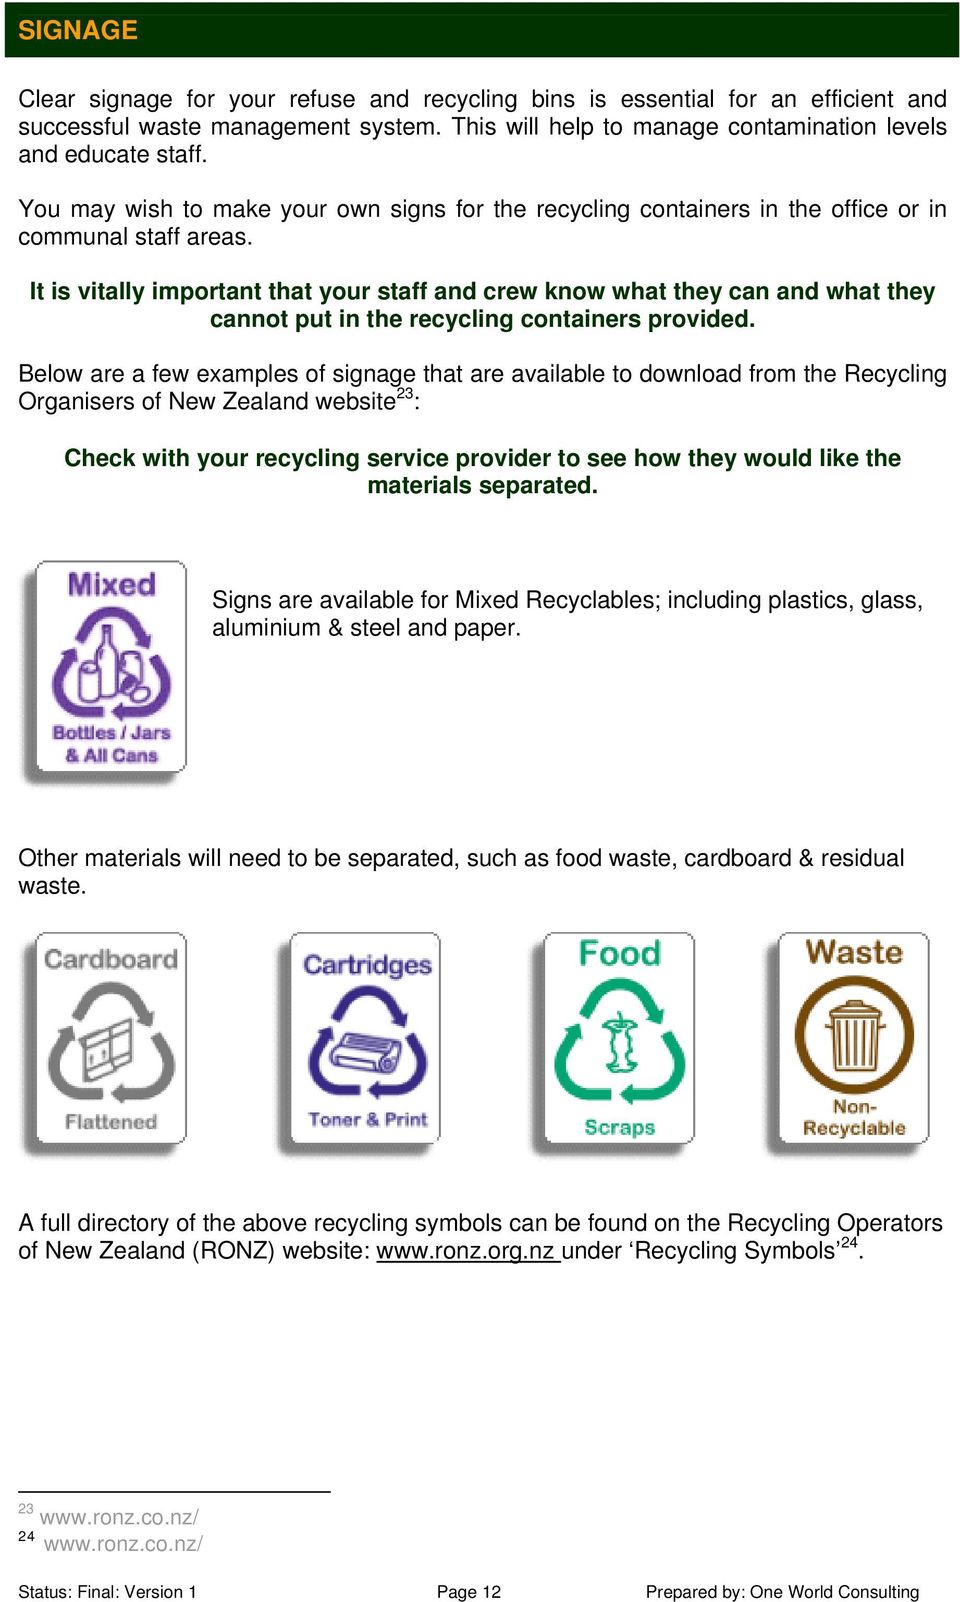 It is vitally important that your staff and crew know what they can and what they cannot put in the recycling containers provided.